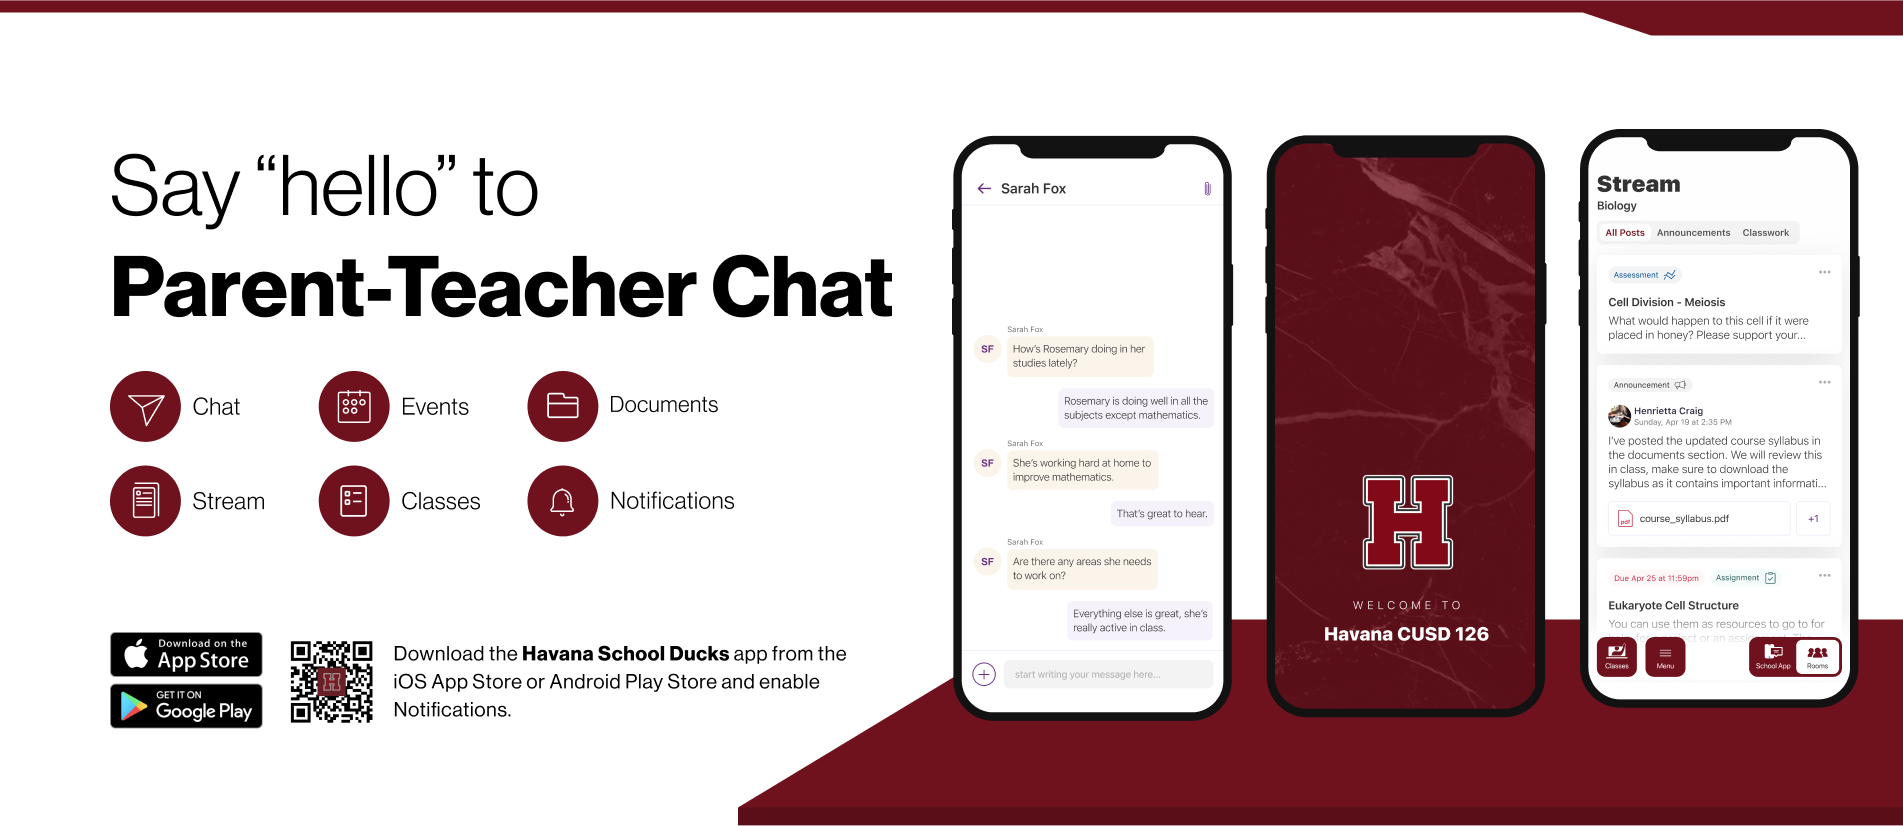 New "ROOMS" parent -teacher communication feature coming soon!